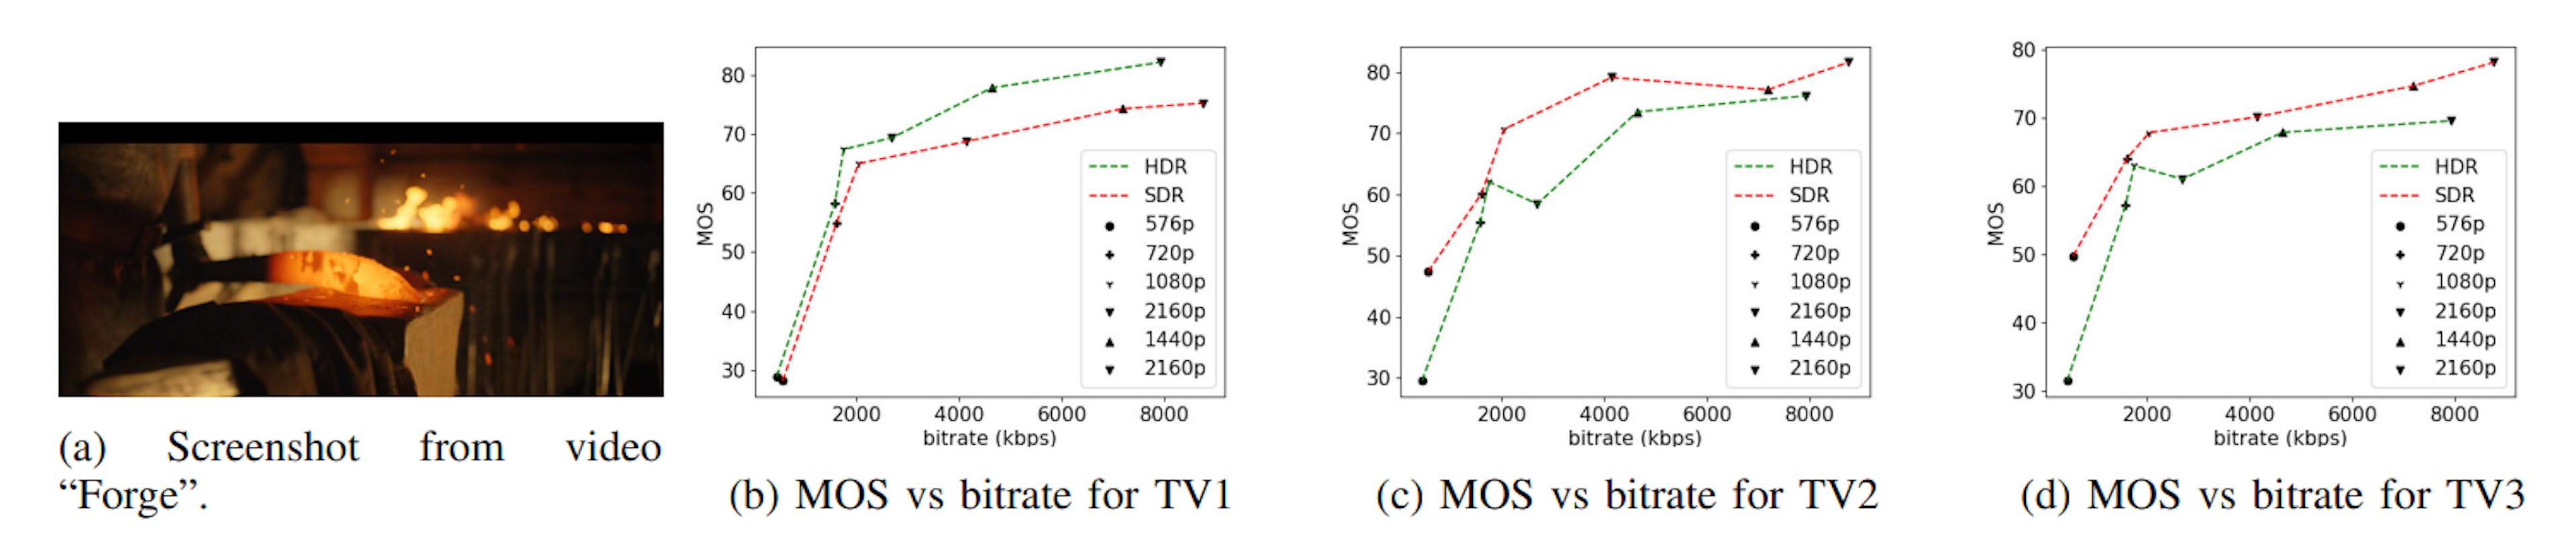 Fig. 2: MOS vs bitrate plots for the three tested televisions on the “Forge” video.